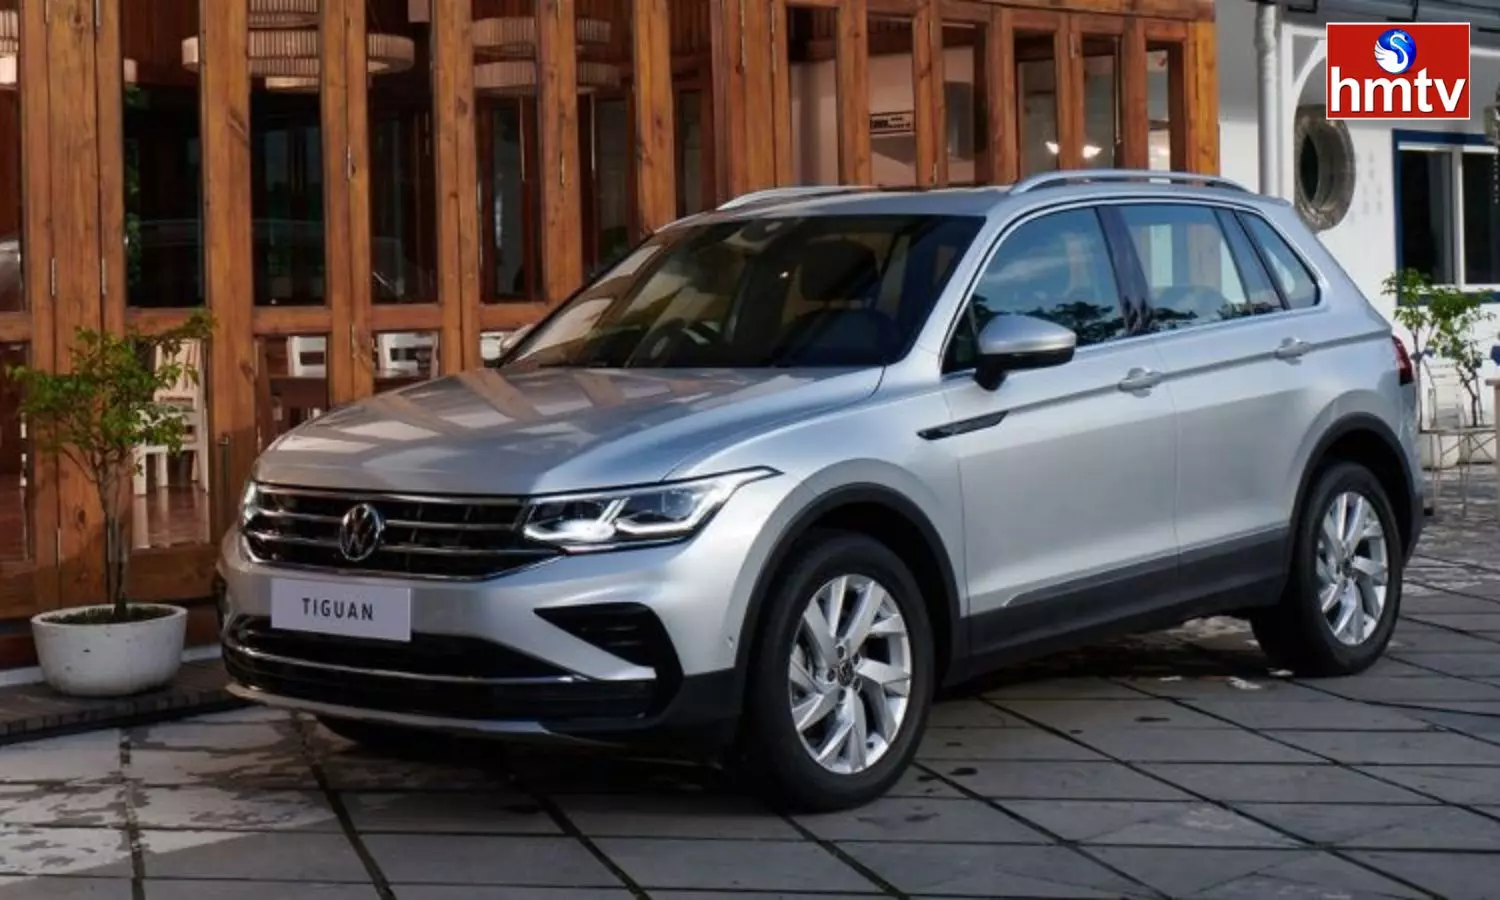 Volkswagen Tiguan Discount Offer Up To Rs 340000 Check Price And Features